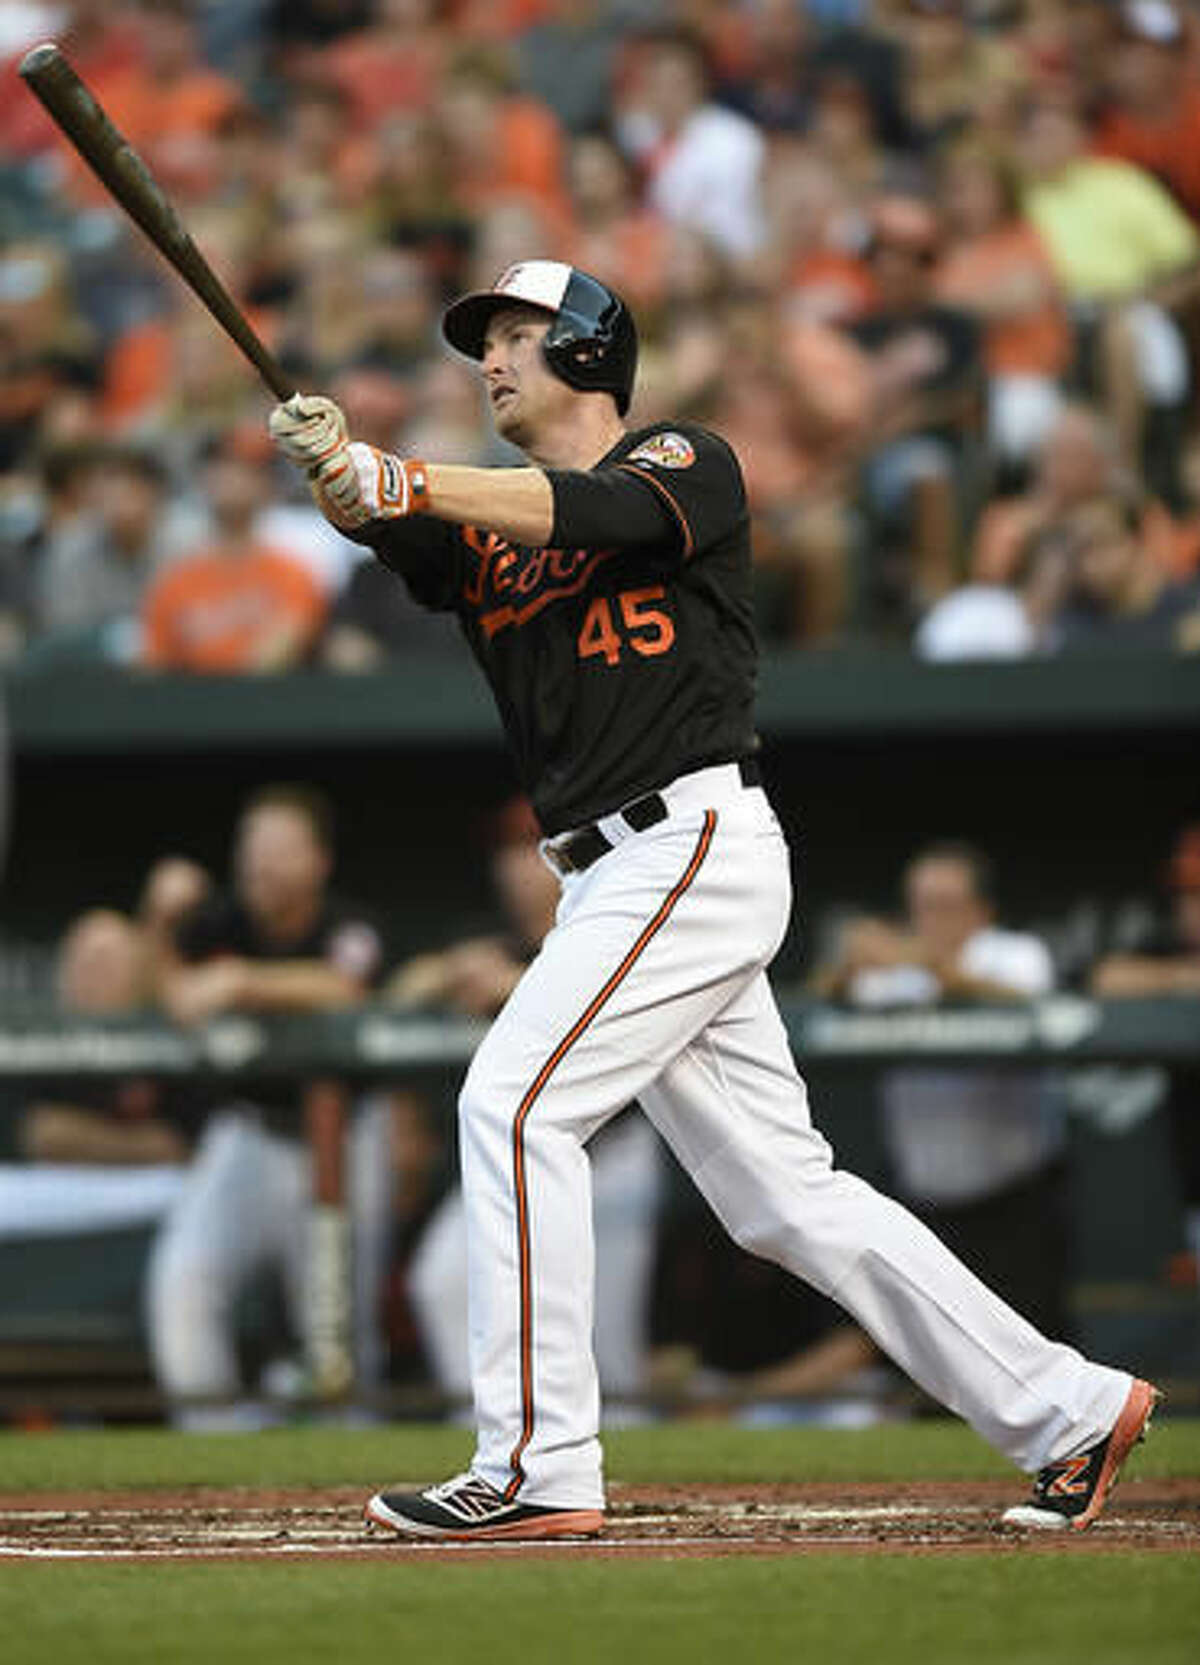 FILE - In this July 22, 2016, file photo, Baltimore Orioles' Mark Trumbo follows through on a three-run home run against the Cleveland Indians in the first inning of a baseball game, in Baltimore. Coming off another series win at Camden Yards, this time over the AL West-leading Texas Rangers, the Orioles boast a major-league best 39-17 record at home. (AP Photo/Gail Burton, File)